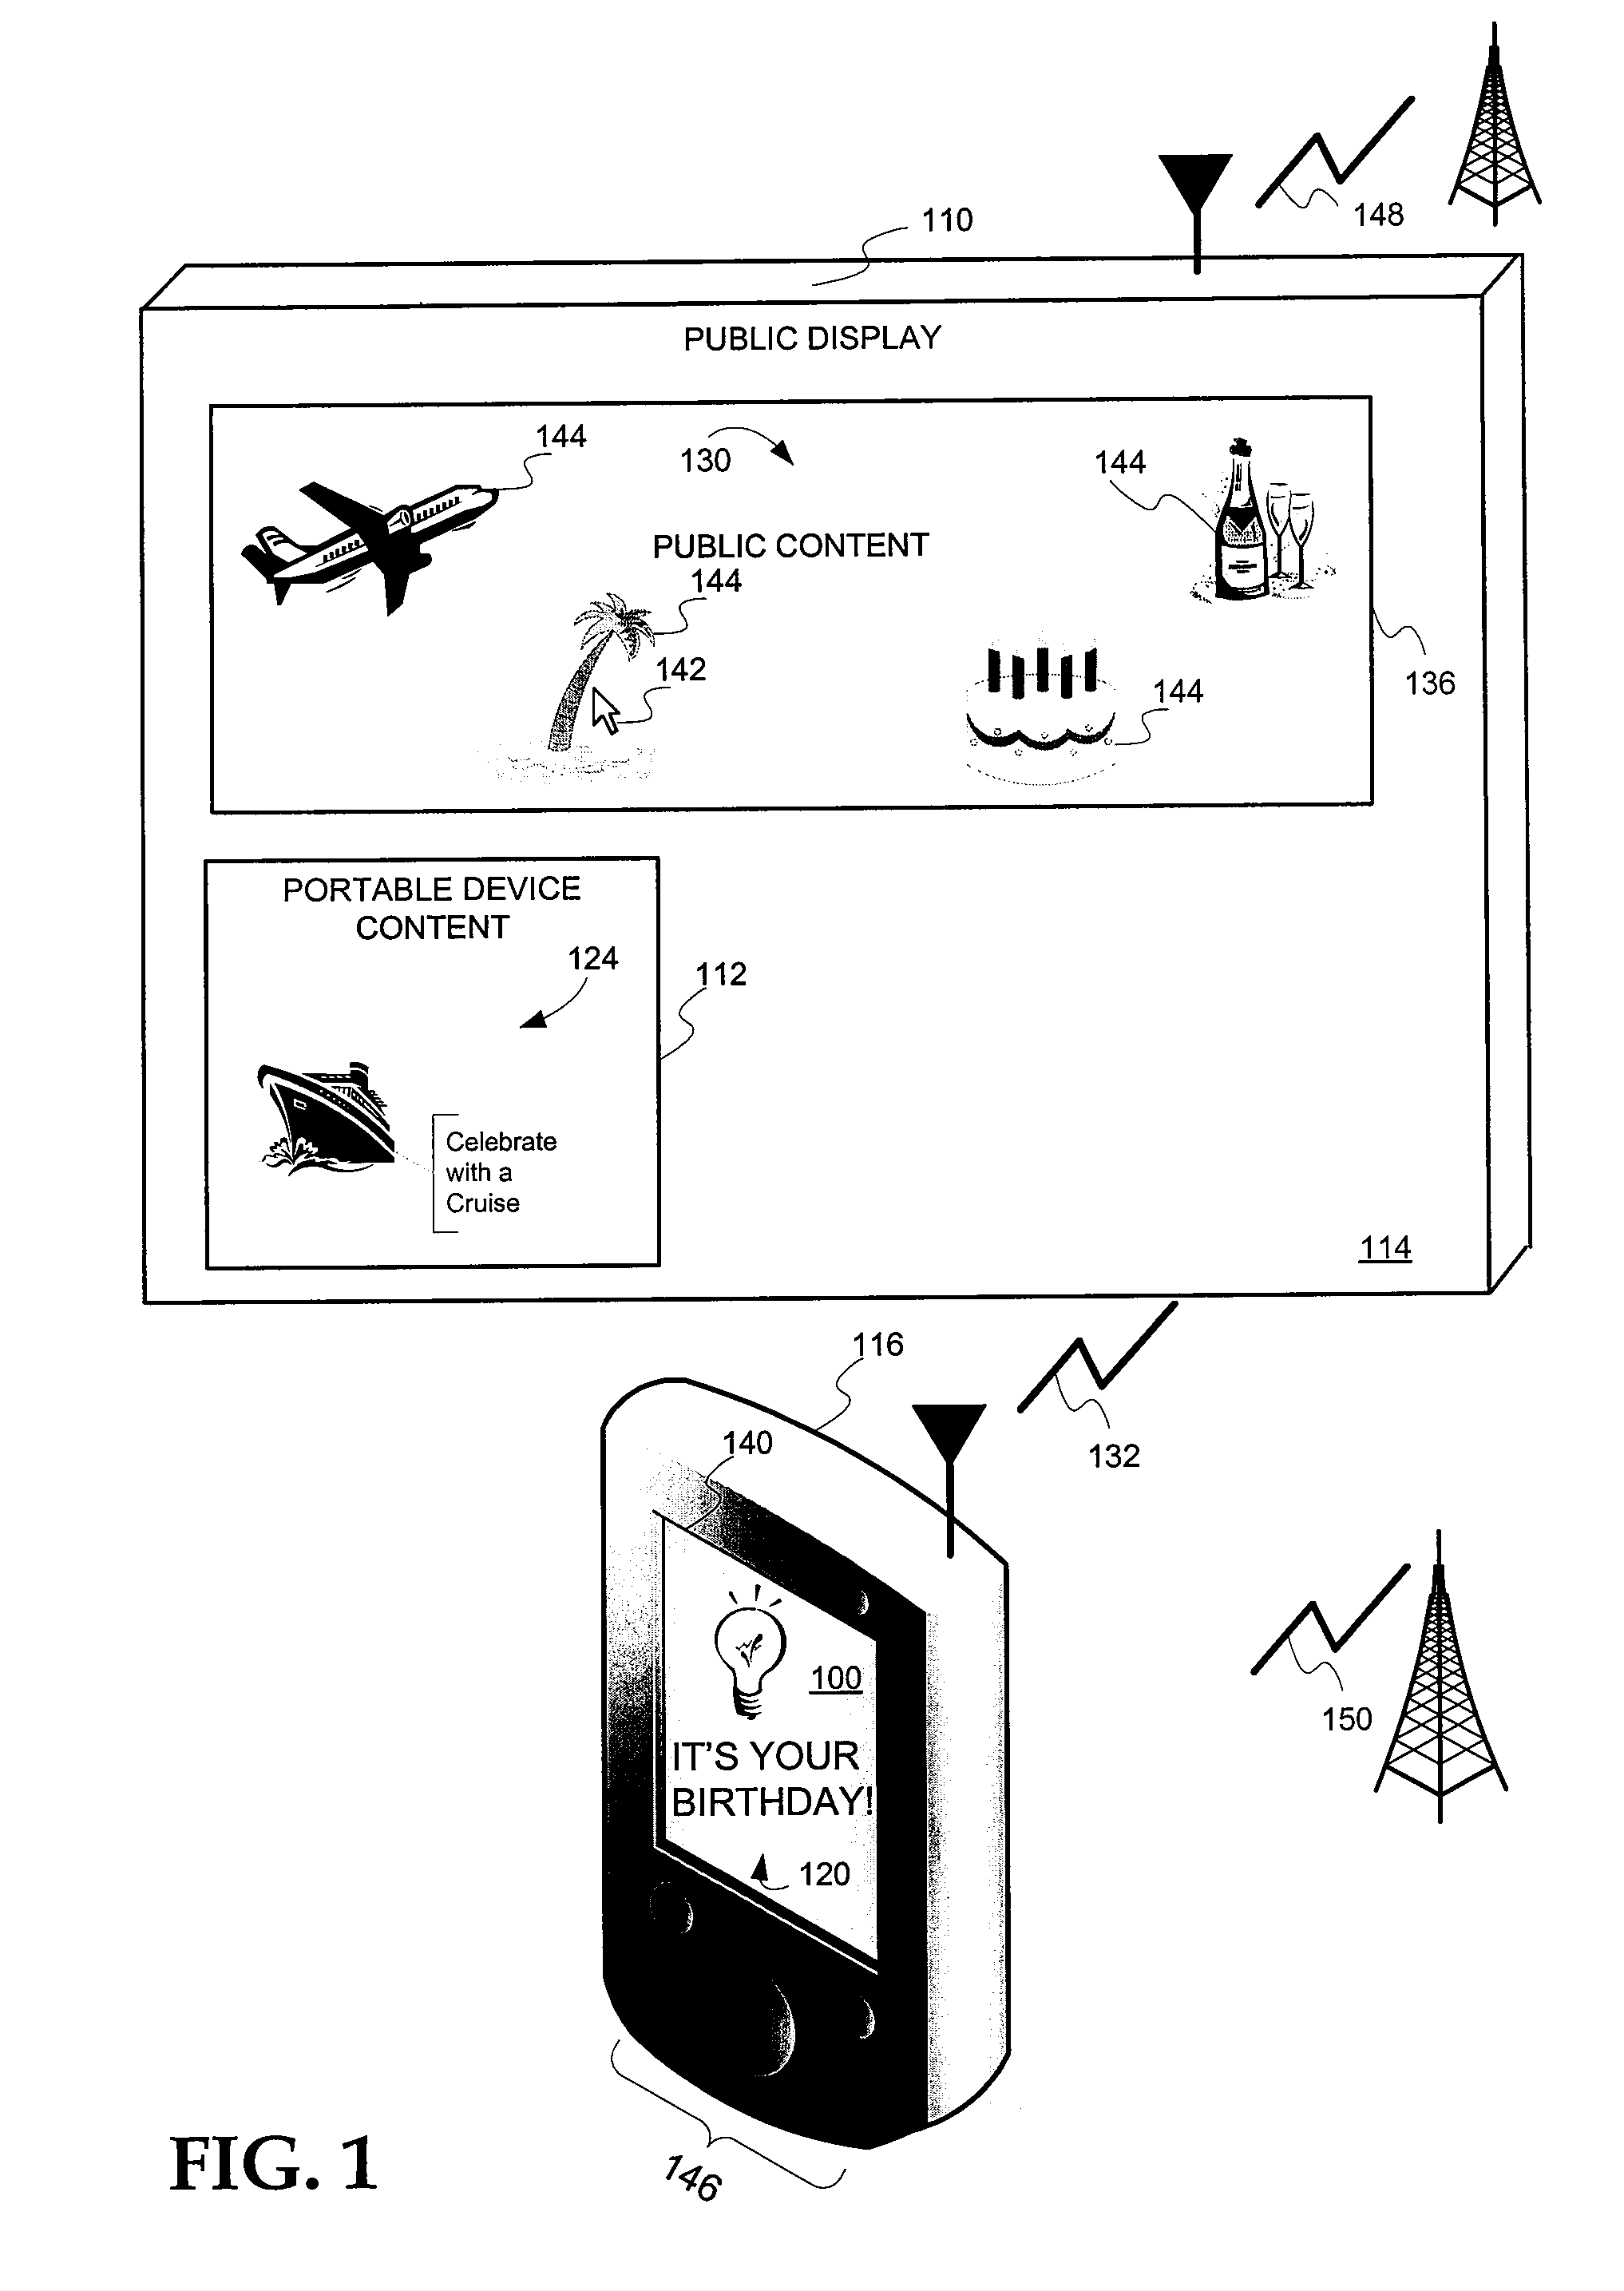 Display extension of portable devices